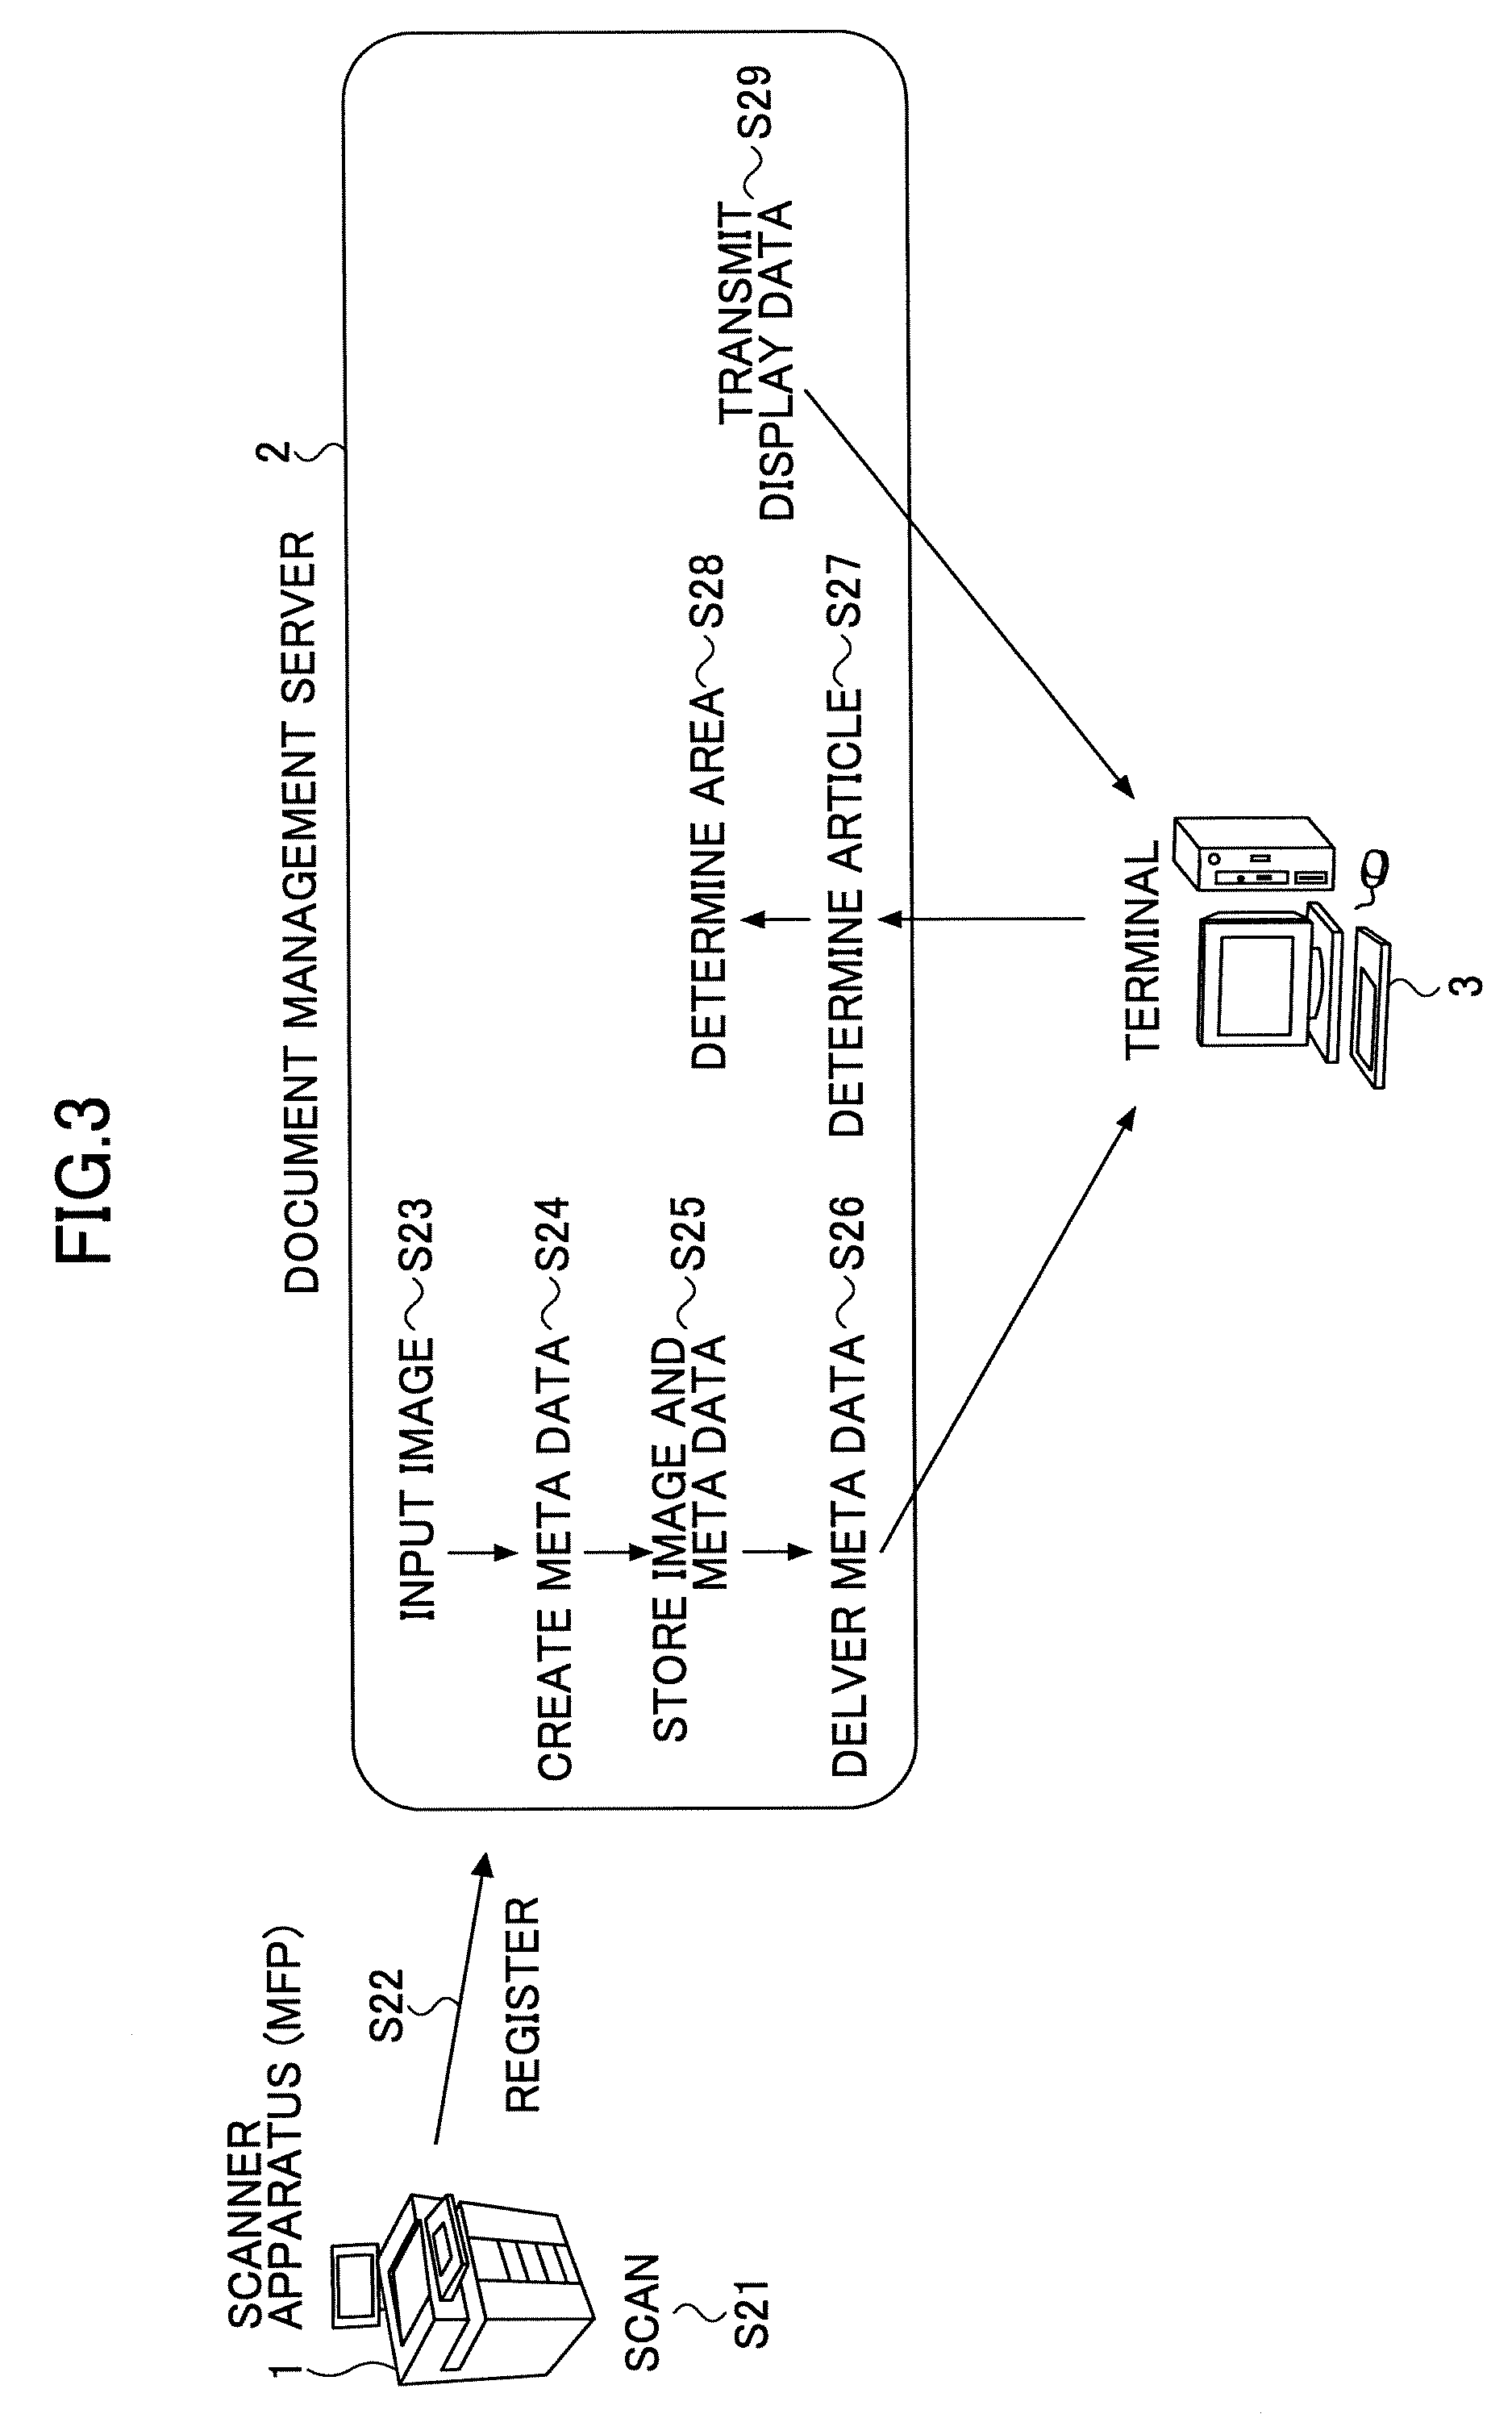 Image reading system